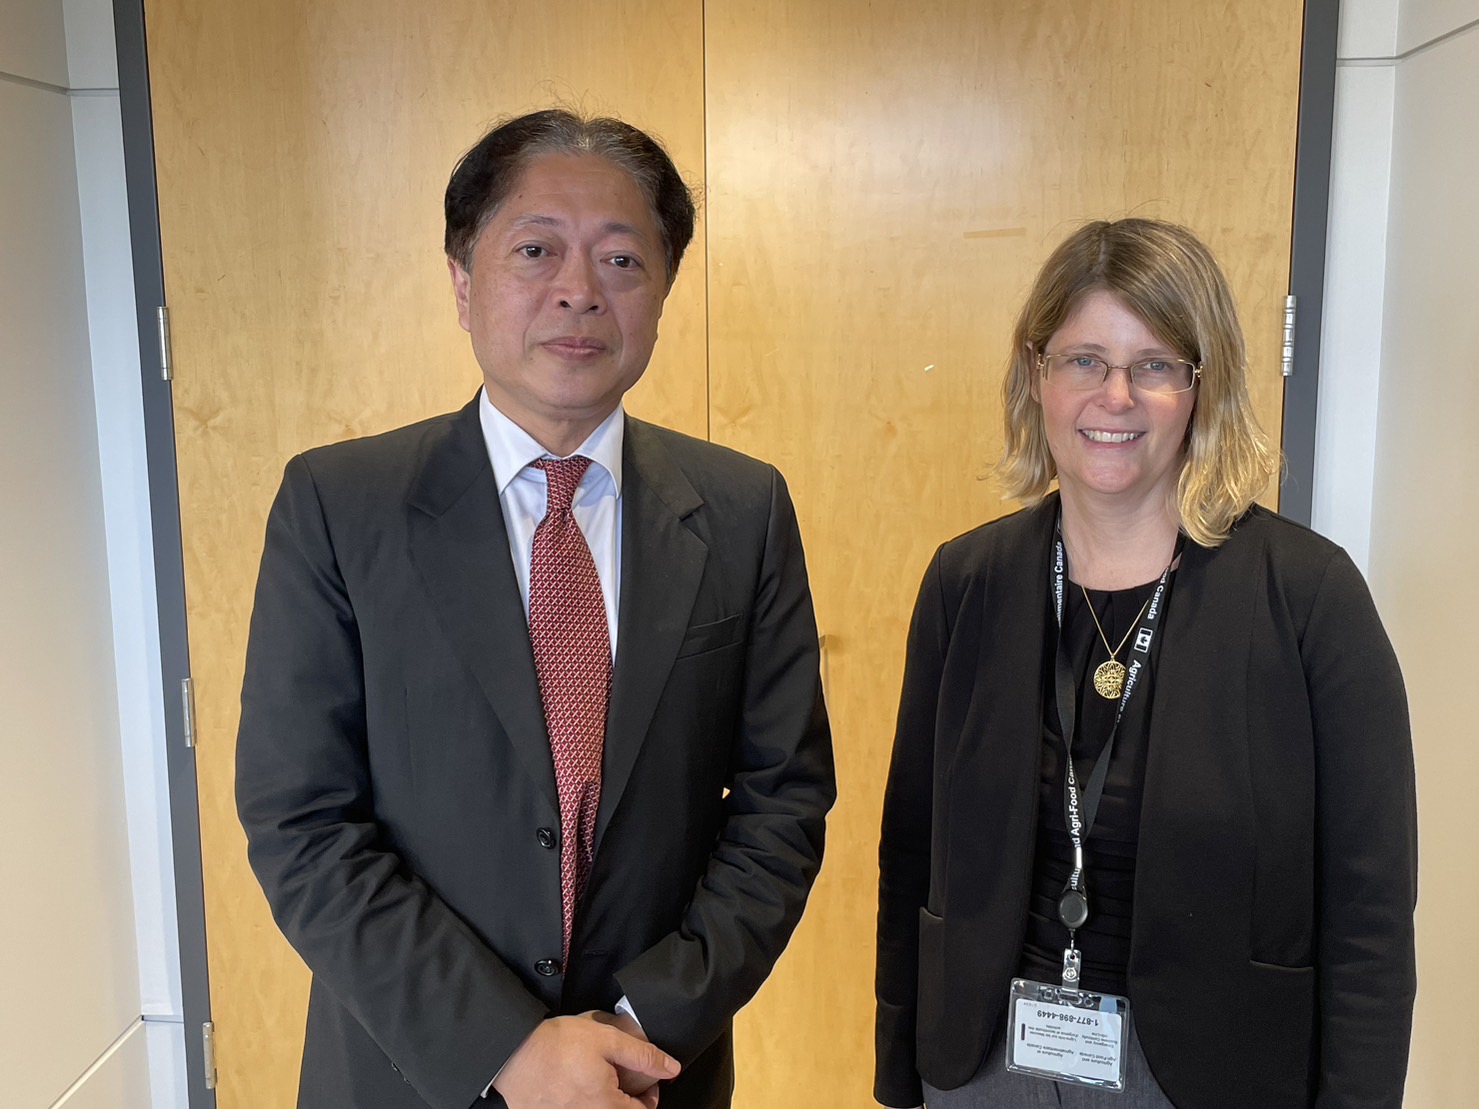 The two co-chairs of the 15th Taiwan-Canada Agricultural Working Group Meeting were Mr. Vincent Lin, Director General of the Department of International Affairs at Taiwan’s Ministry of Agriculture, and Ms. Michelle Cooper, Director General of the Market Access Secretariat at Agriculture and Agri-Food Canada.